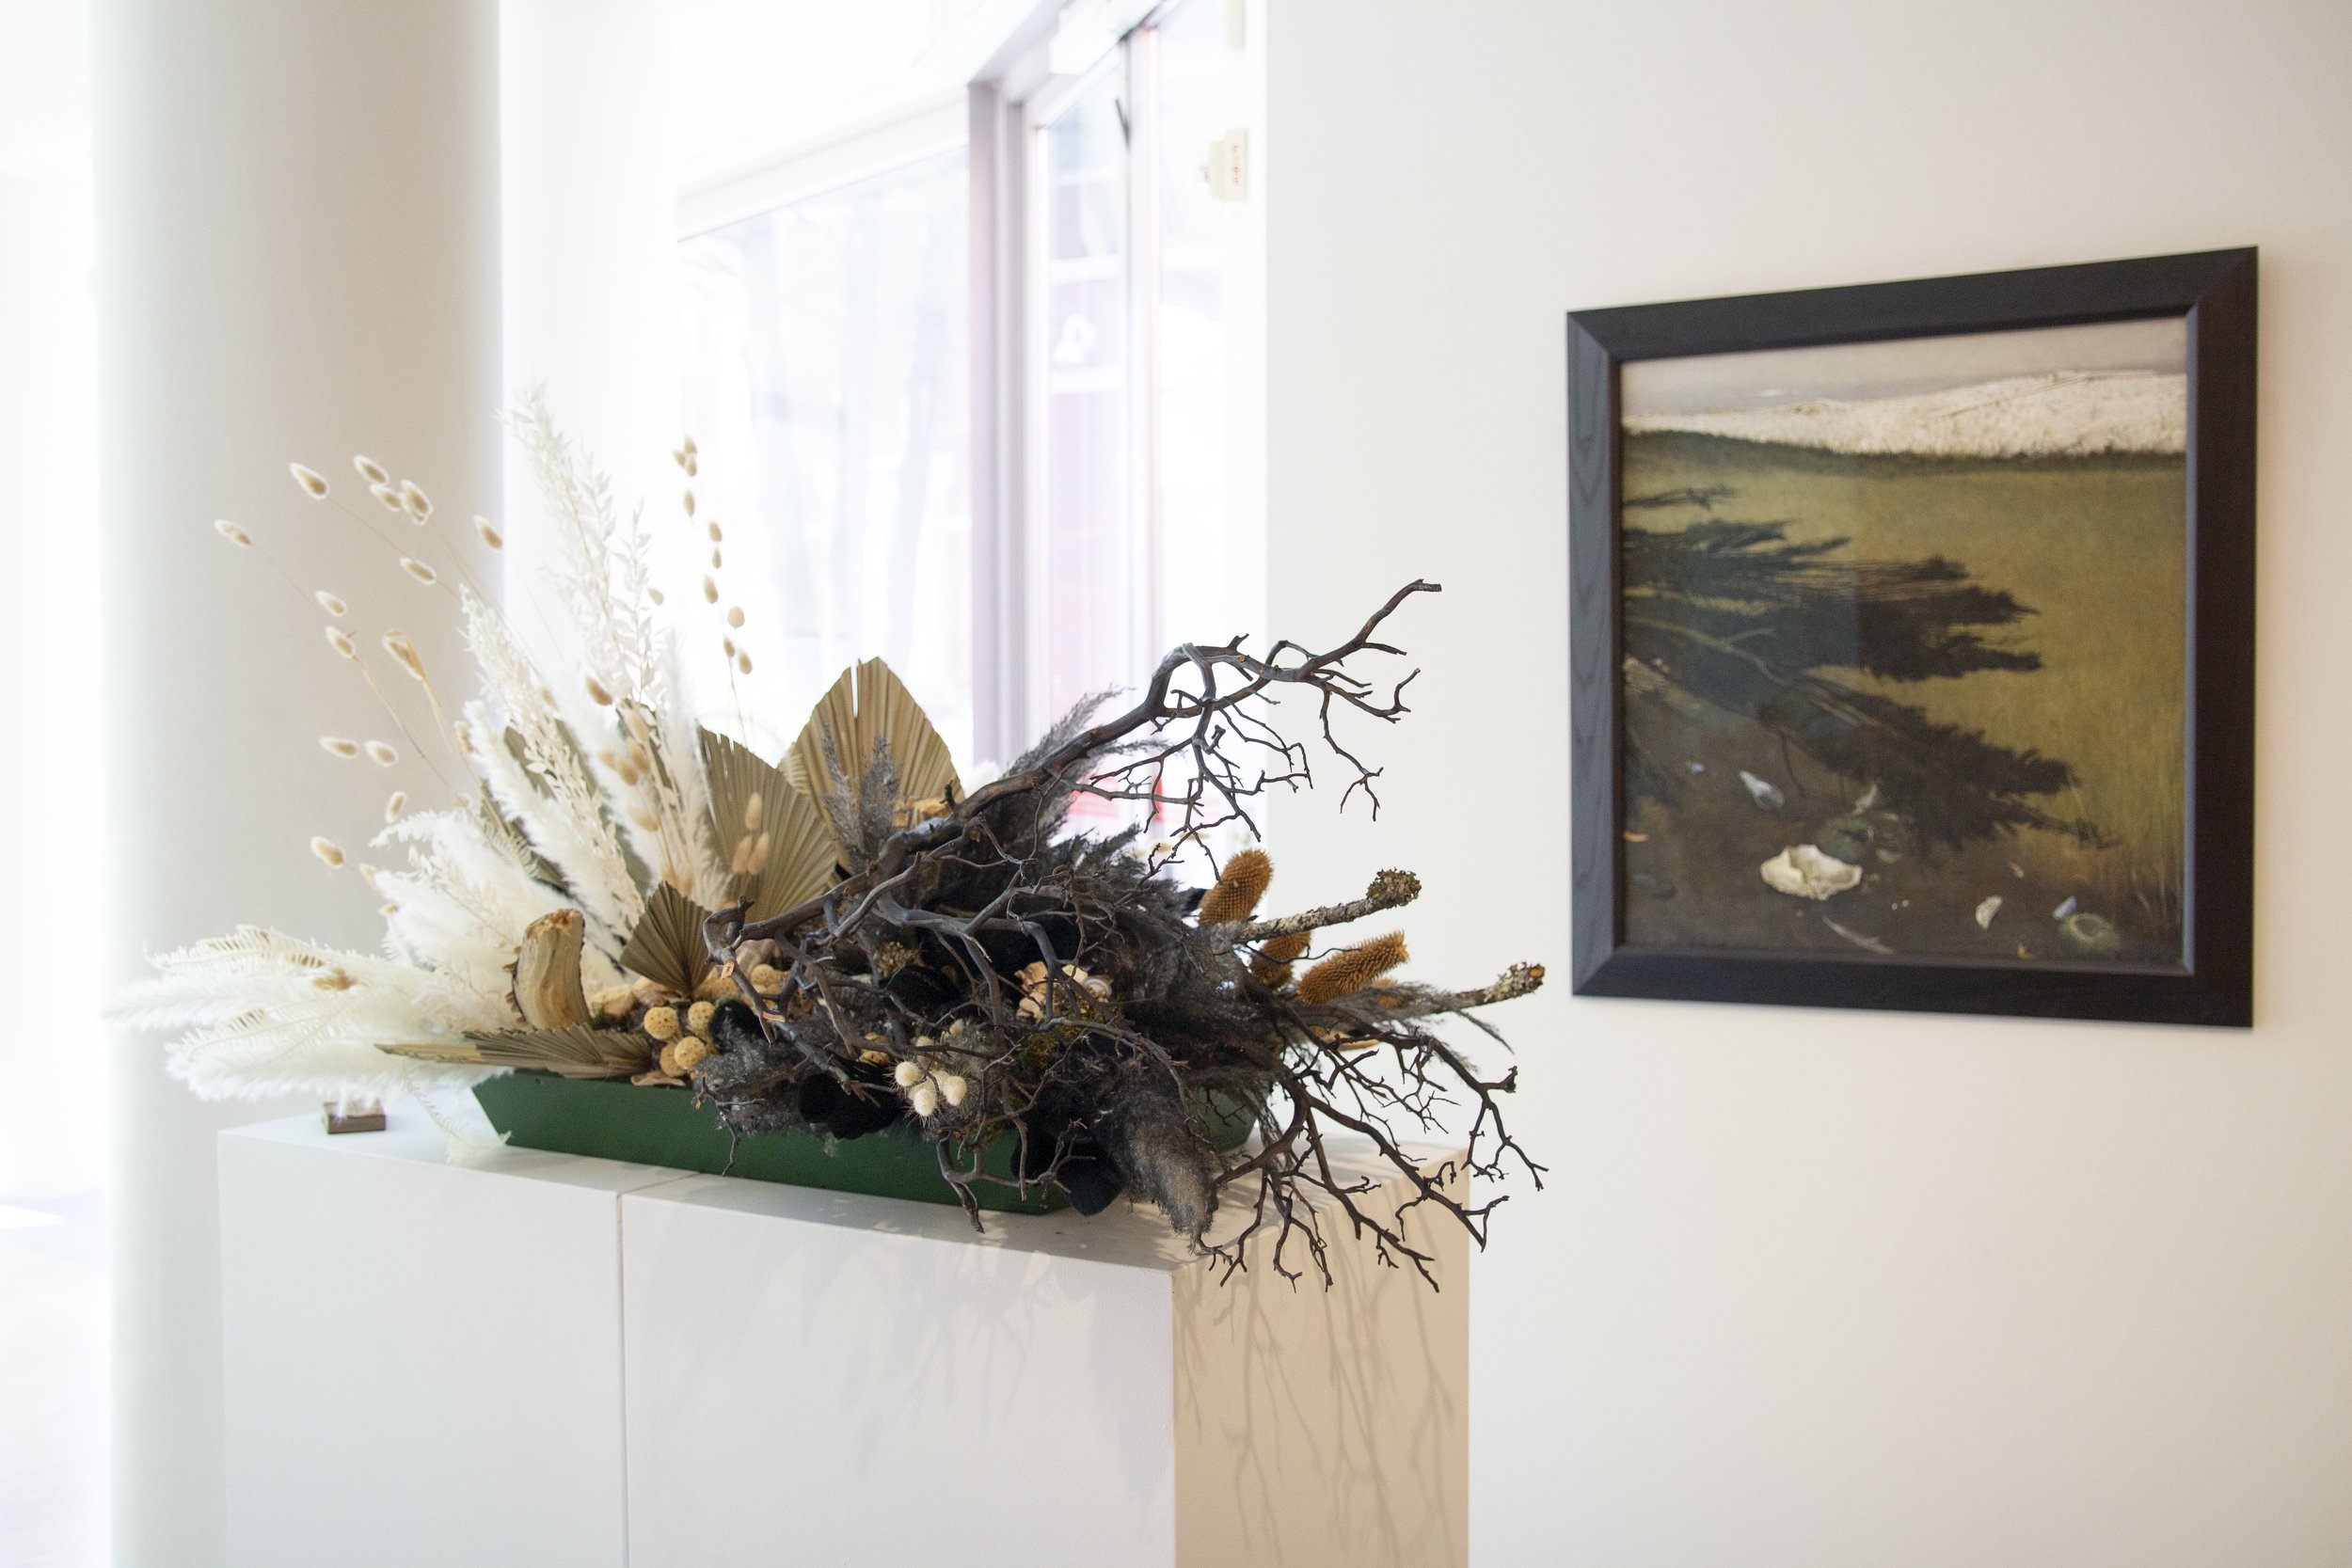   Marcia Davis Flowers, Migis Hospitality Group    Inspiration :  Raven's Grove  by Andrew Wyeth   Materials:  Roses, feathers, italian ruscus, pods, clam shells, lichen, moss, branches, preserved mushrooms, craspedia, turkey tail, palms, pampas gras